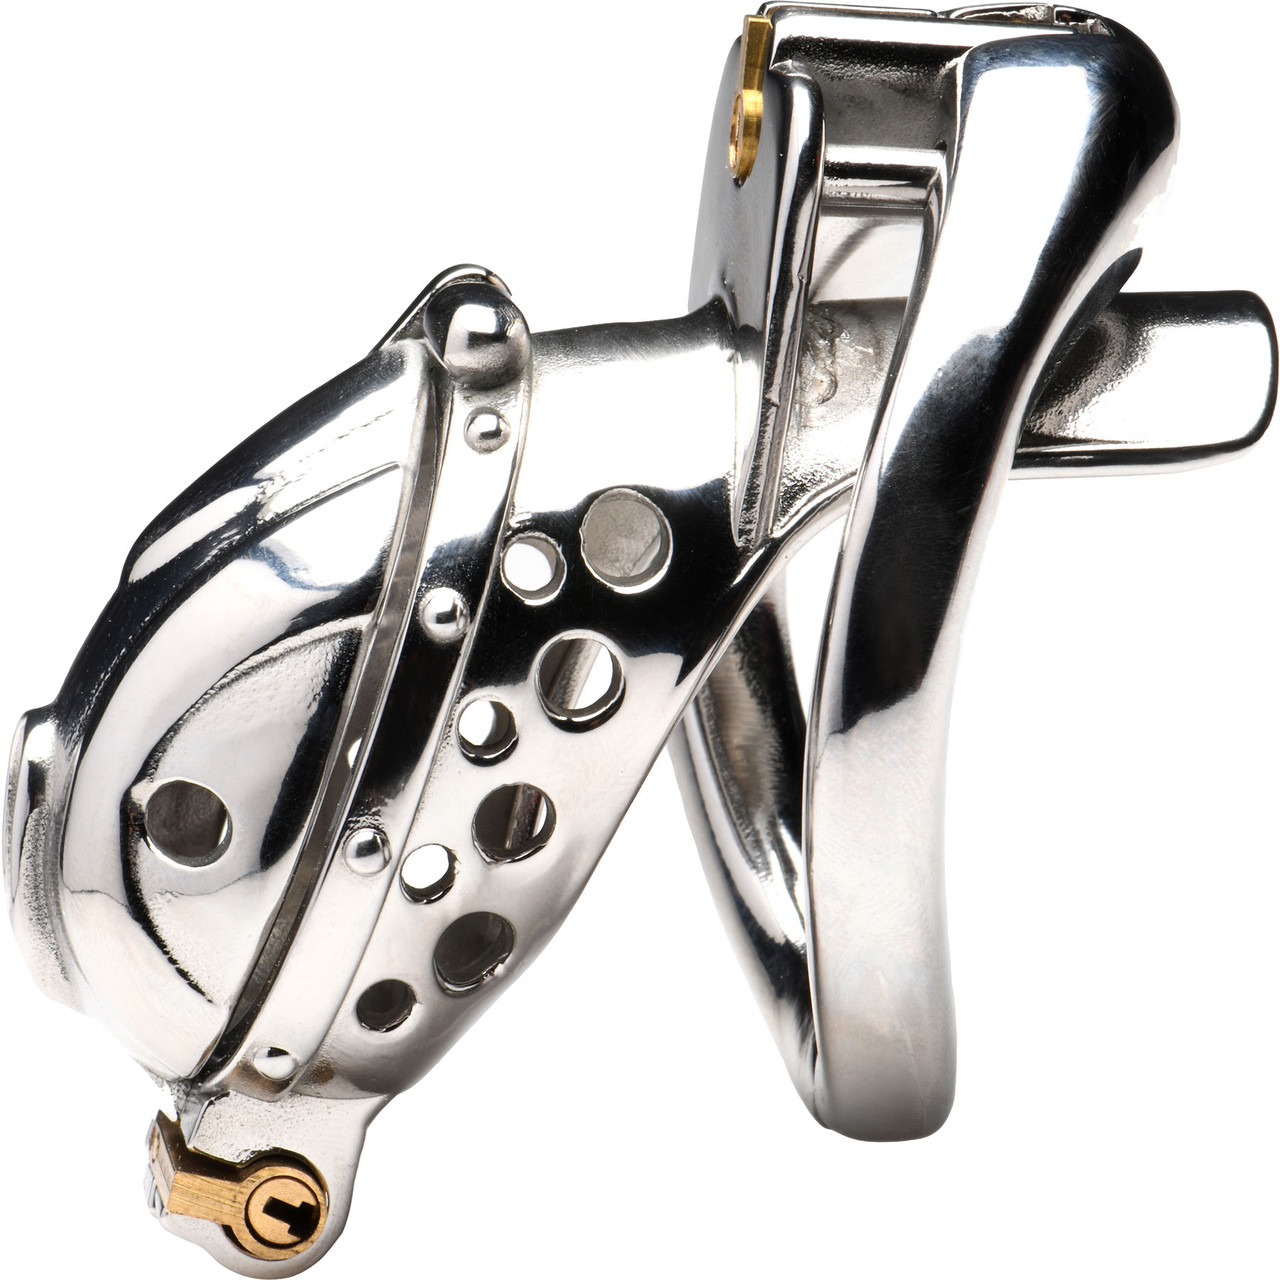 MASTER SERIES Entrapment Deluxe Locking Chastity Cage for Men, and Couples.  Stainles Steel Cage with 4 Different Components Perfect for Chastity Play.